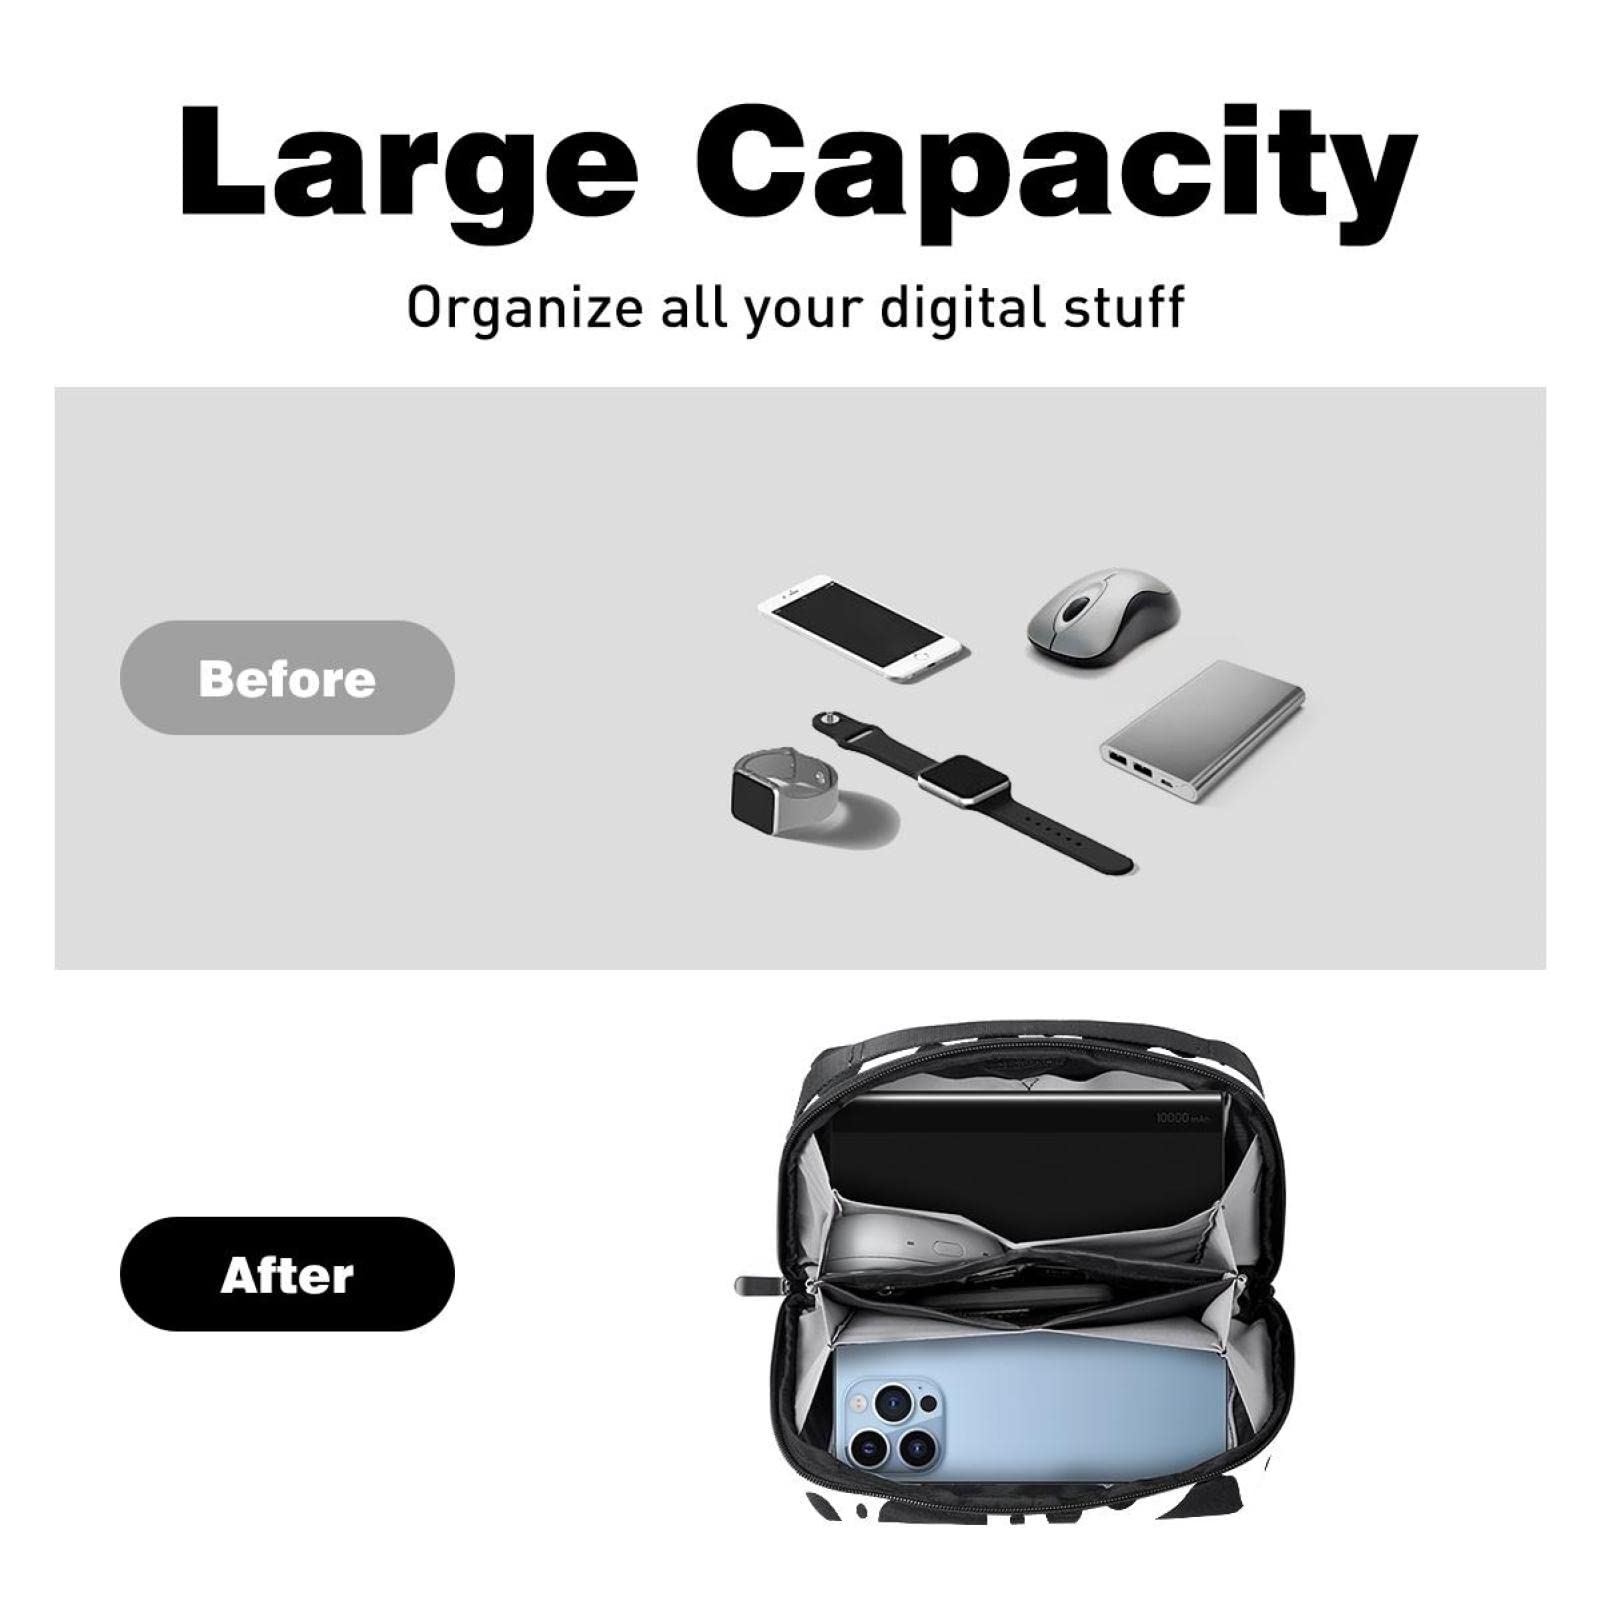 Electronics Organizer, Cow Skin Animal Small Travel Cable Organizer Carrying Bag, Compact Tech Case Bag for Electronic Accessories, Cords, Charger, USB, Hard Drives